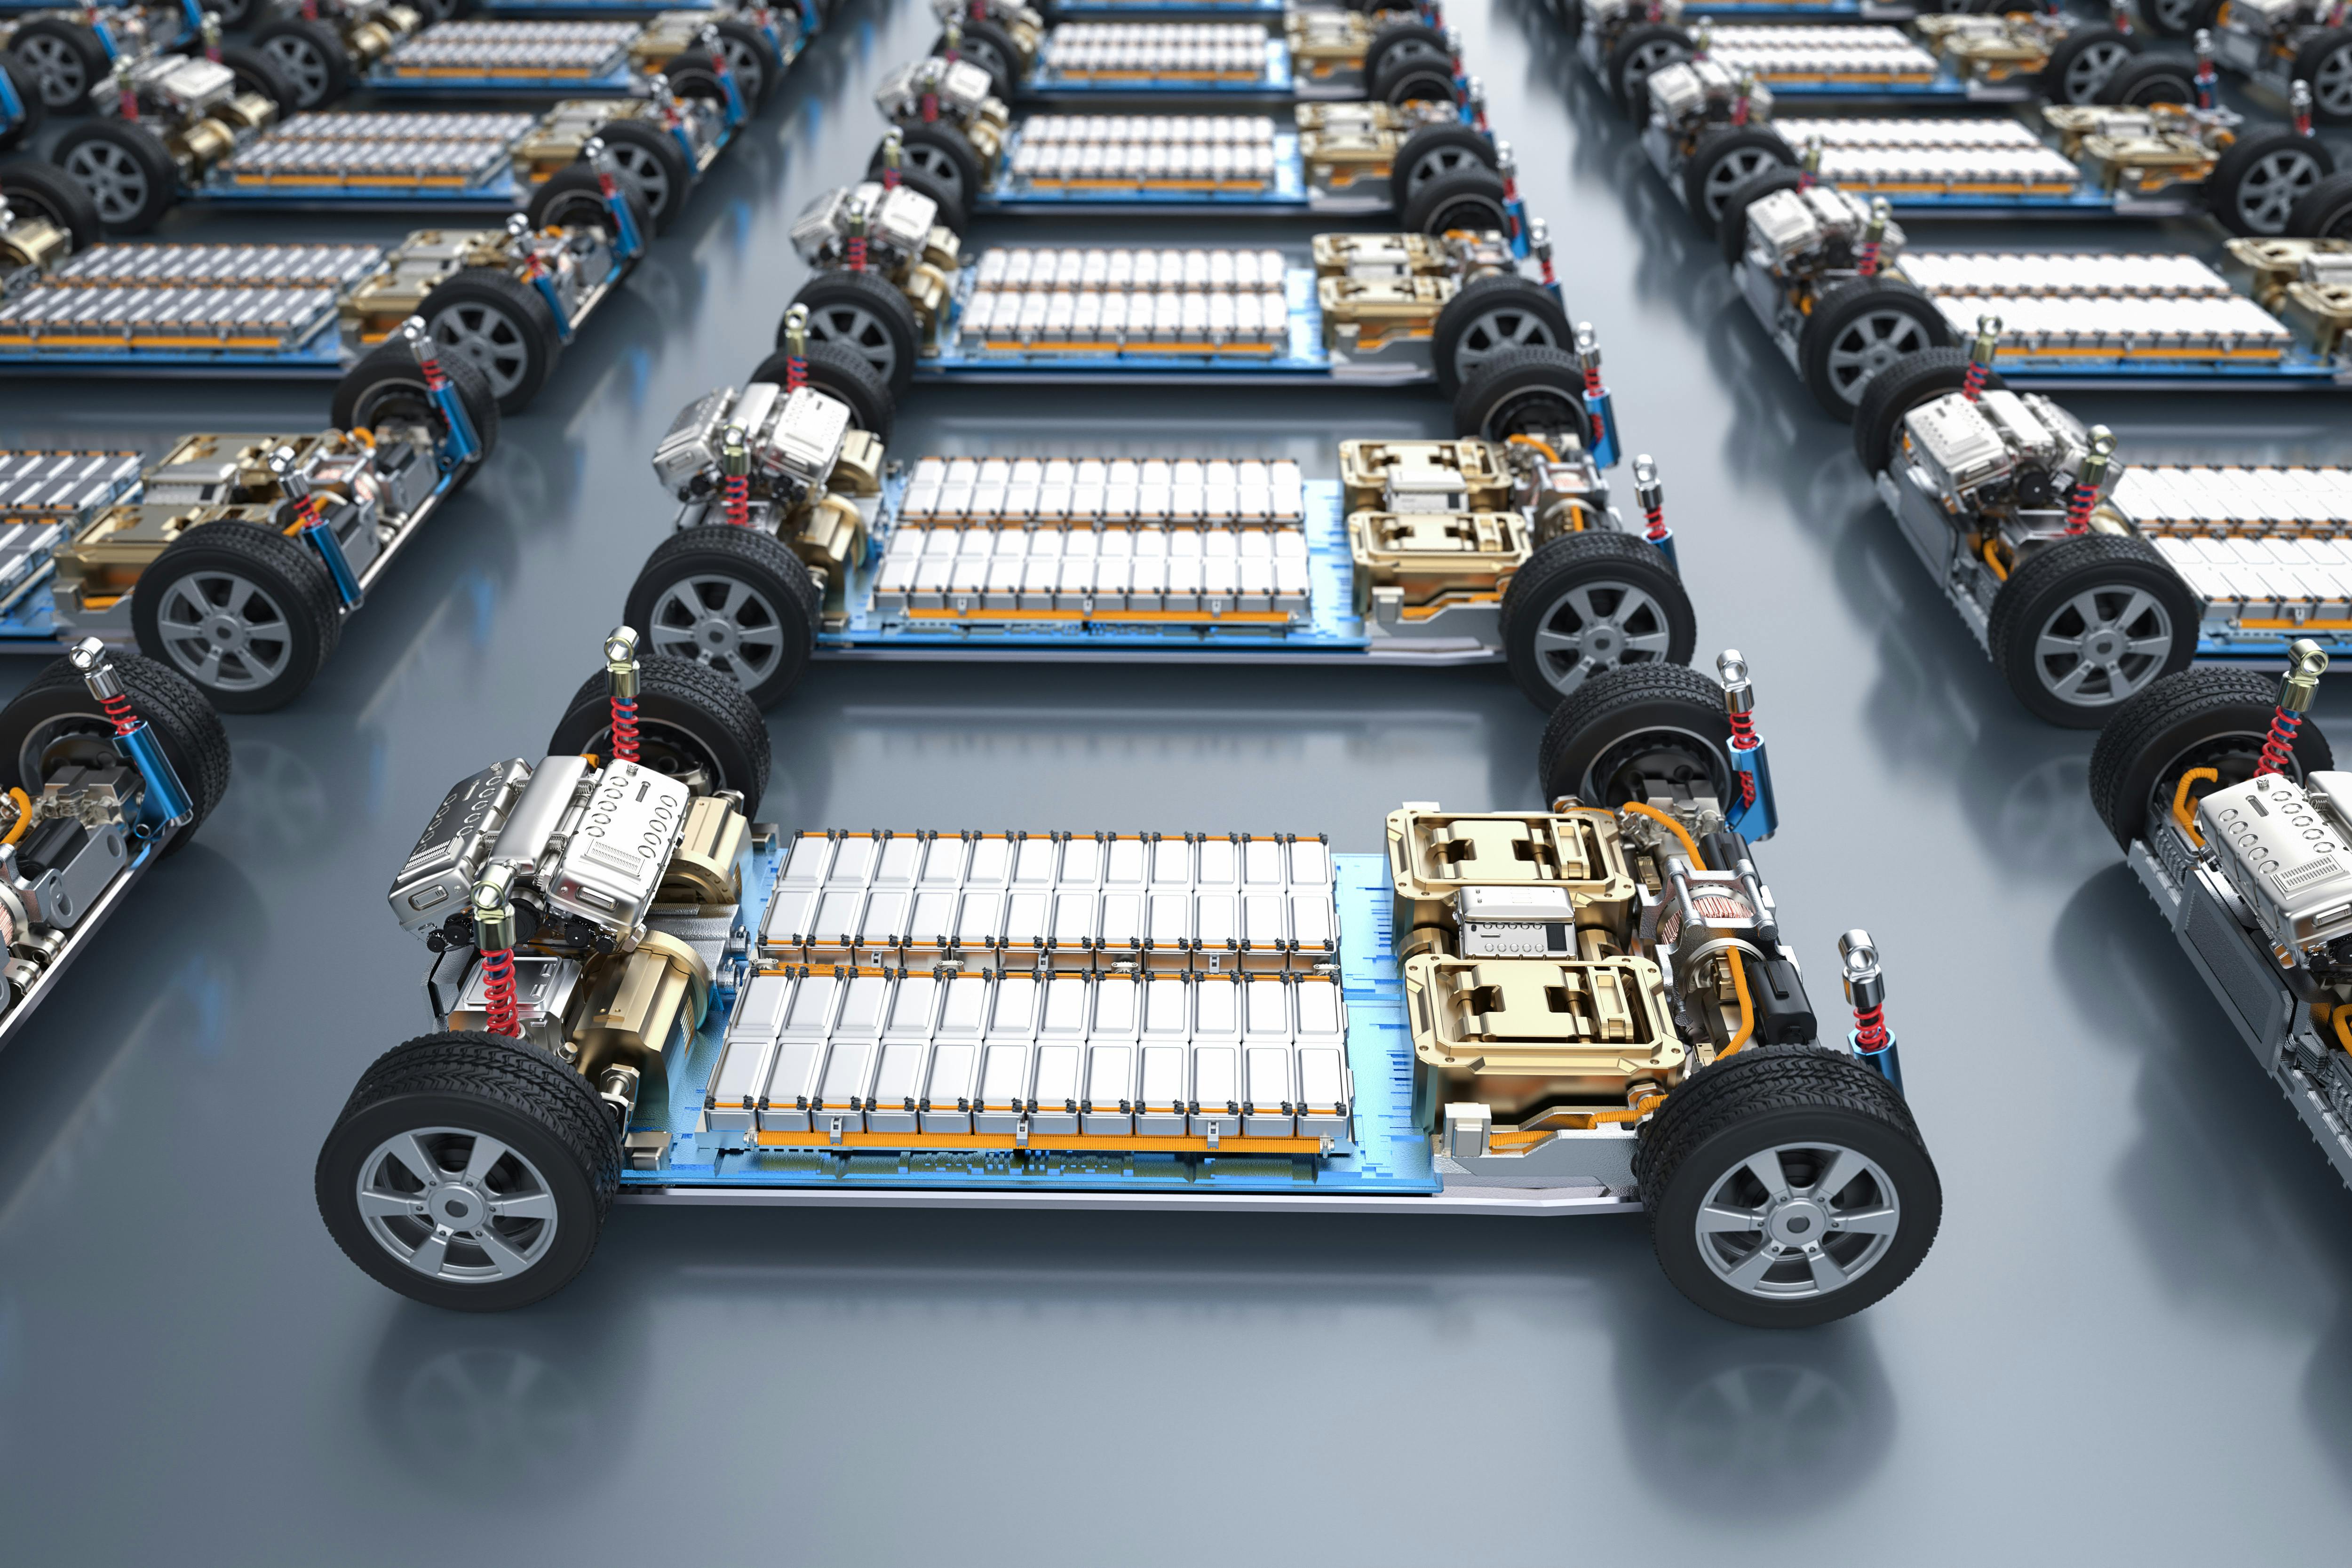 The chassis of an electric car packed with battery cells. The chassis includes twin motors and the four tires. There is one EV in the foreground surrounded by dozens of others.